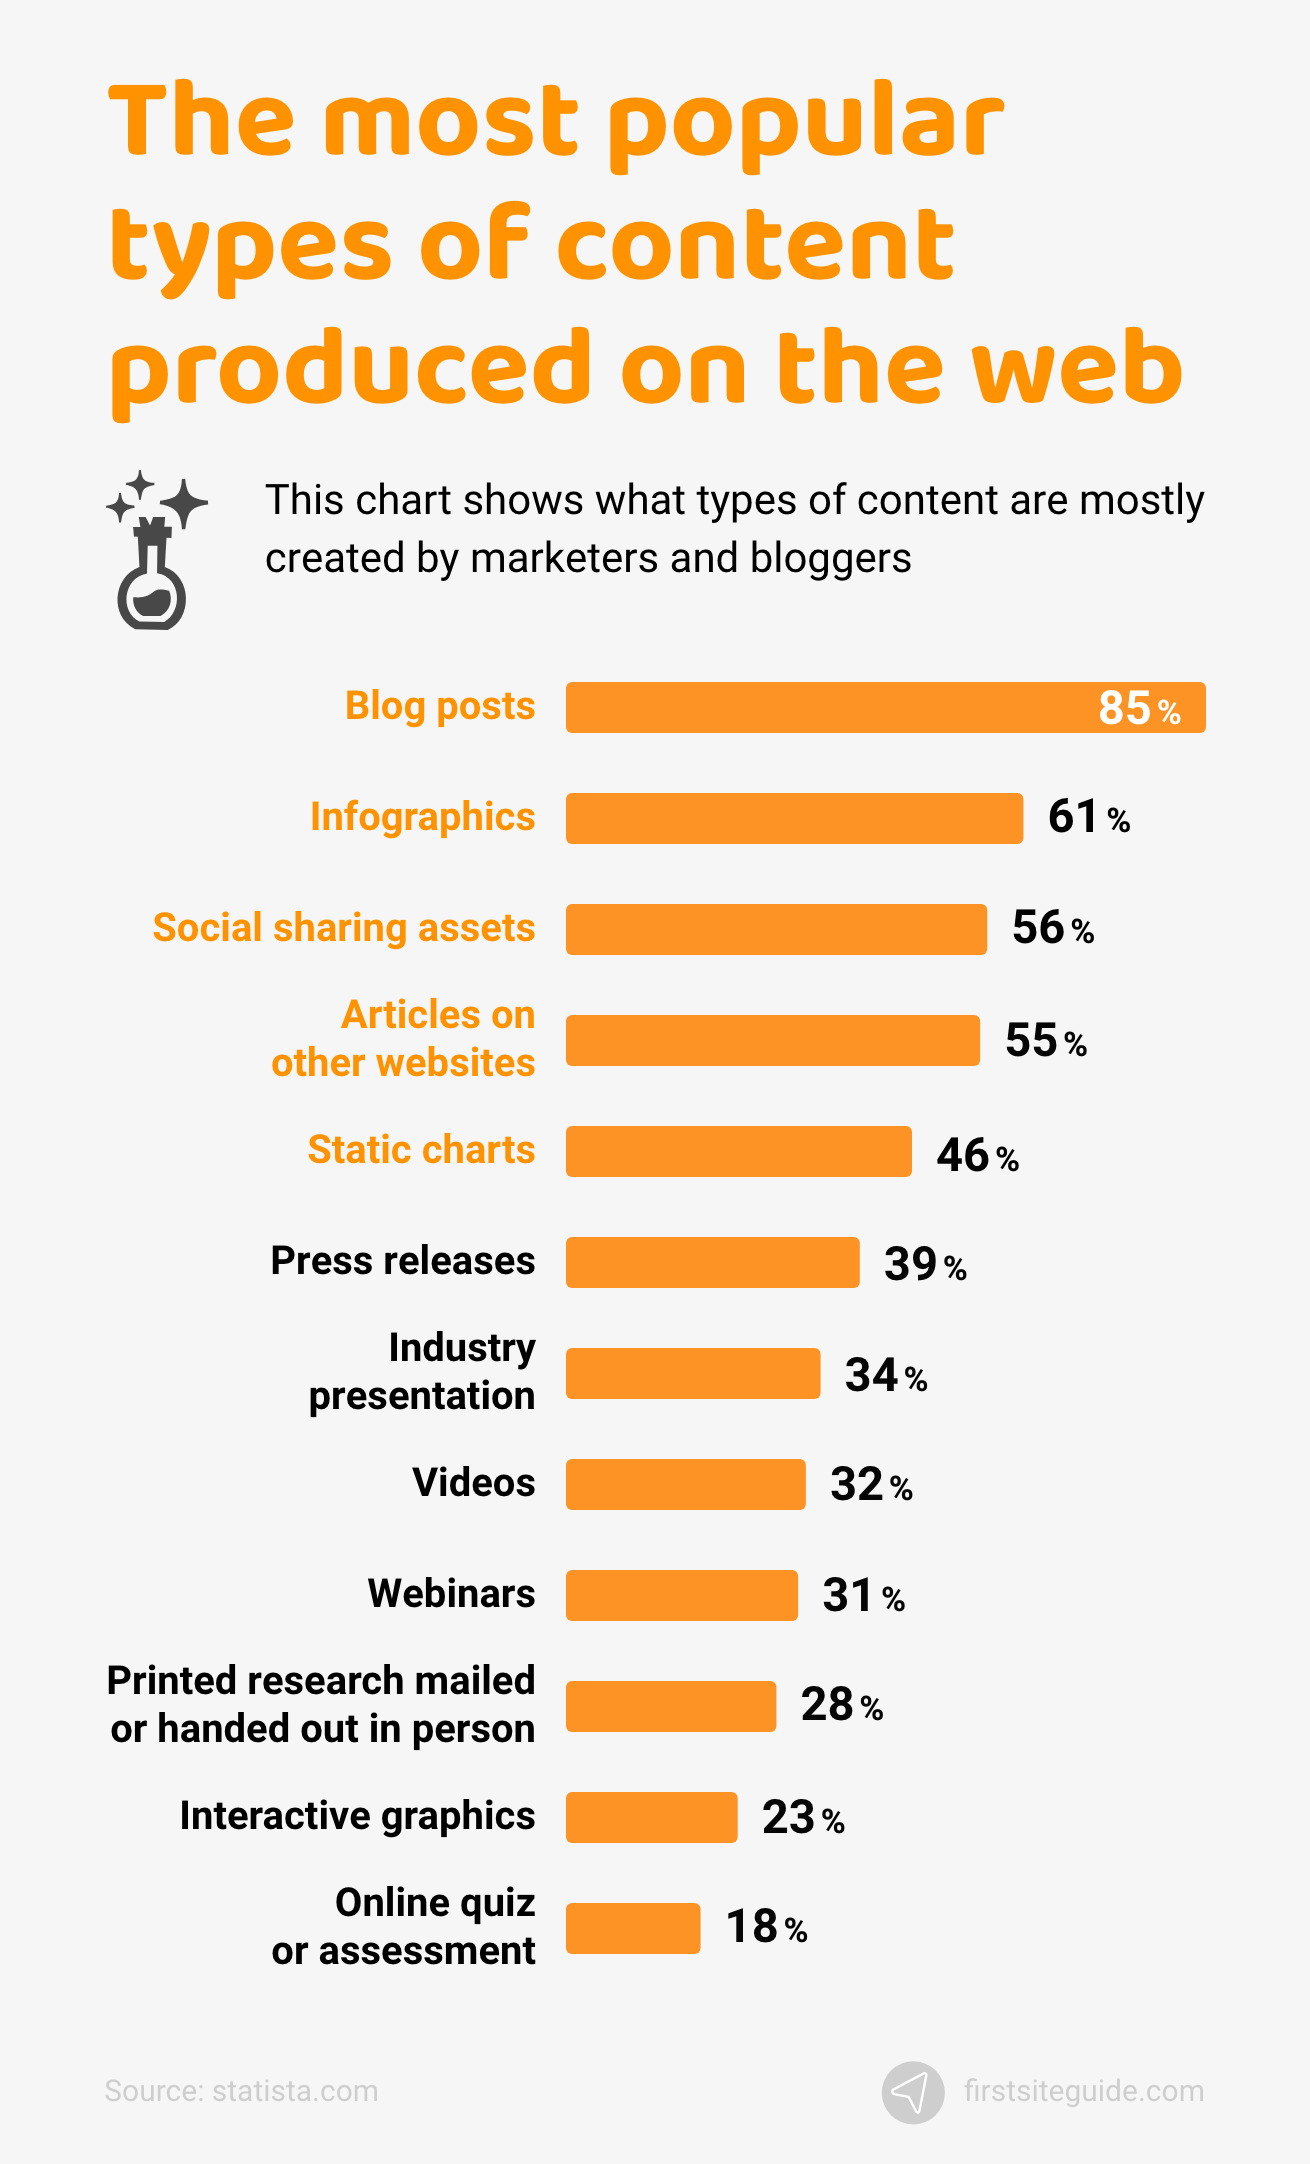 The most popular types of content produced on the web